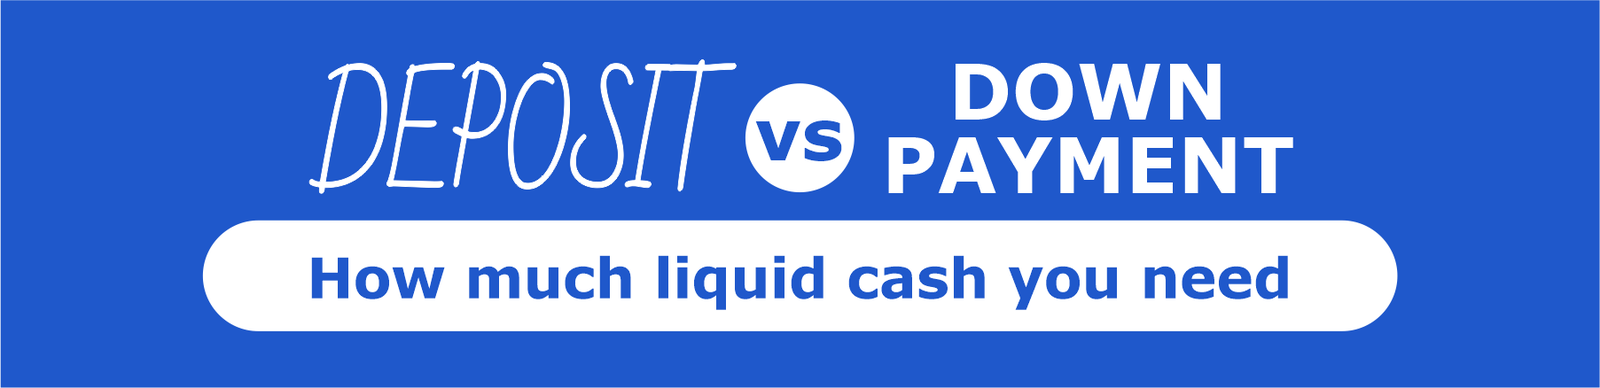 Deposit Vs. Down Payment - How Much Liquid Cash Do I Need?